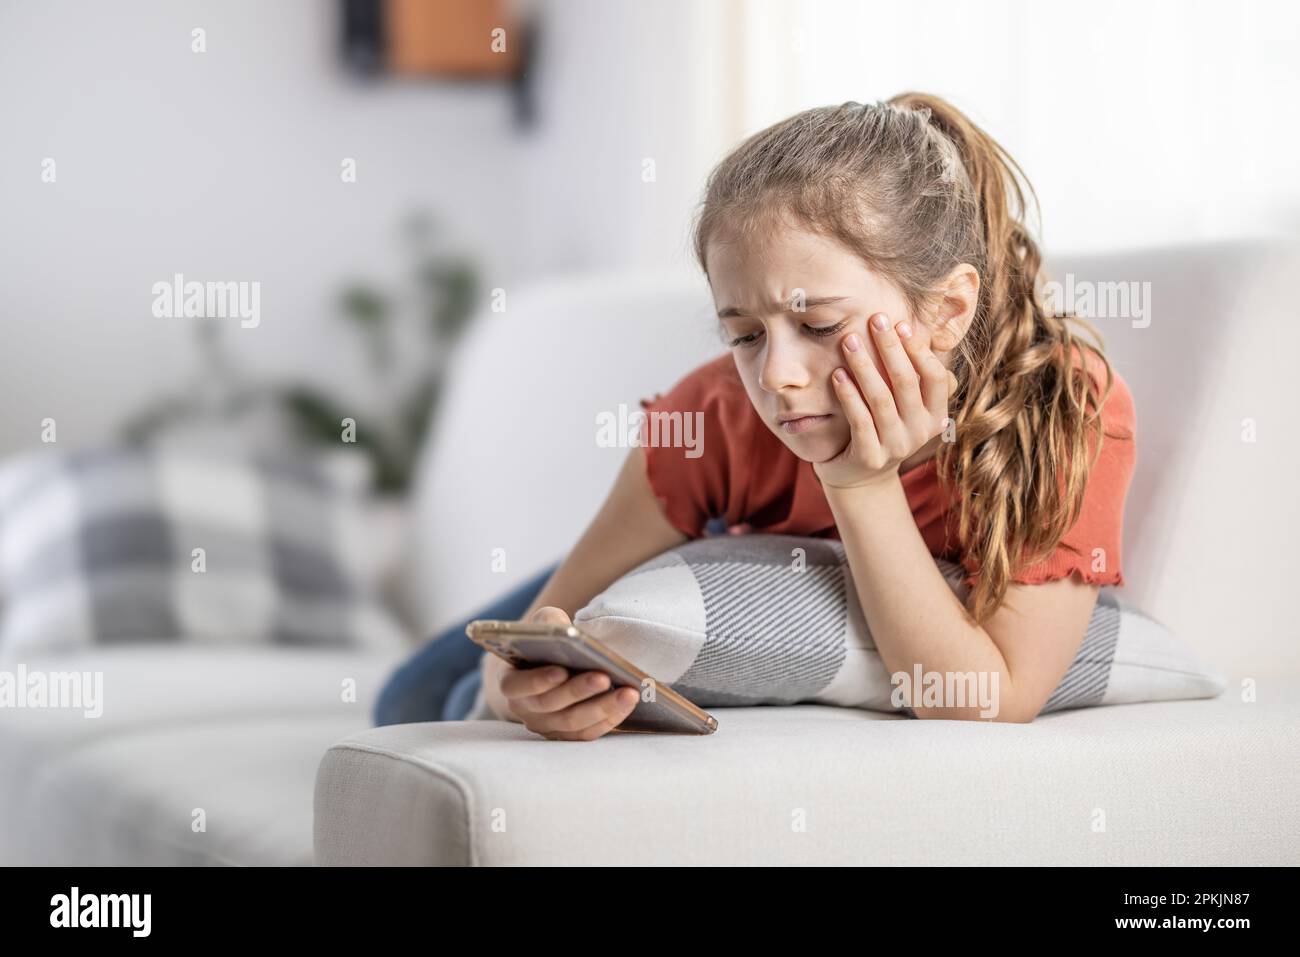 Bored young girl finds no more joy in scrolling on her phone as she sits at home on a couch. Stock Photo